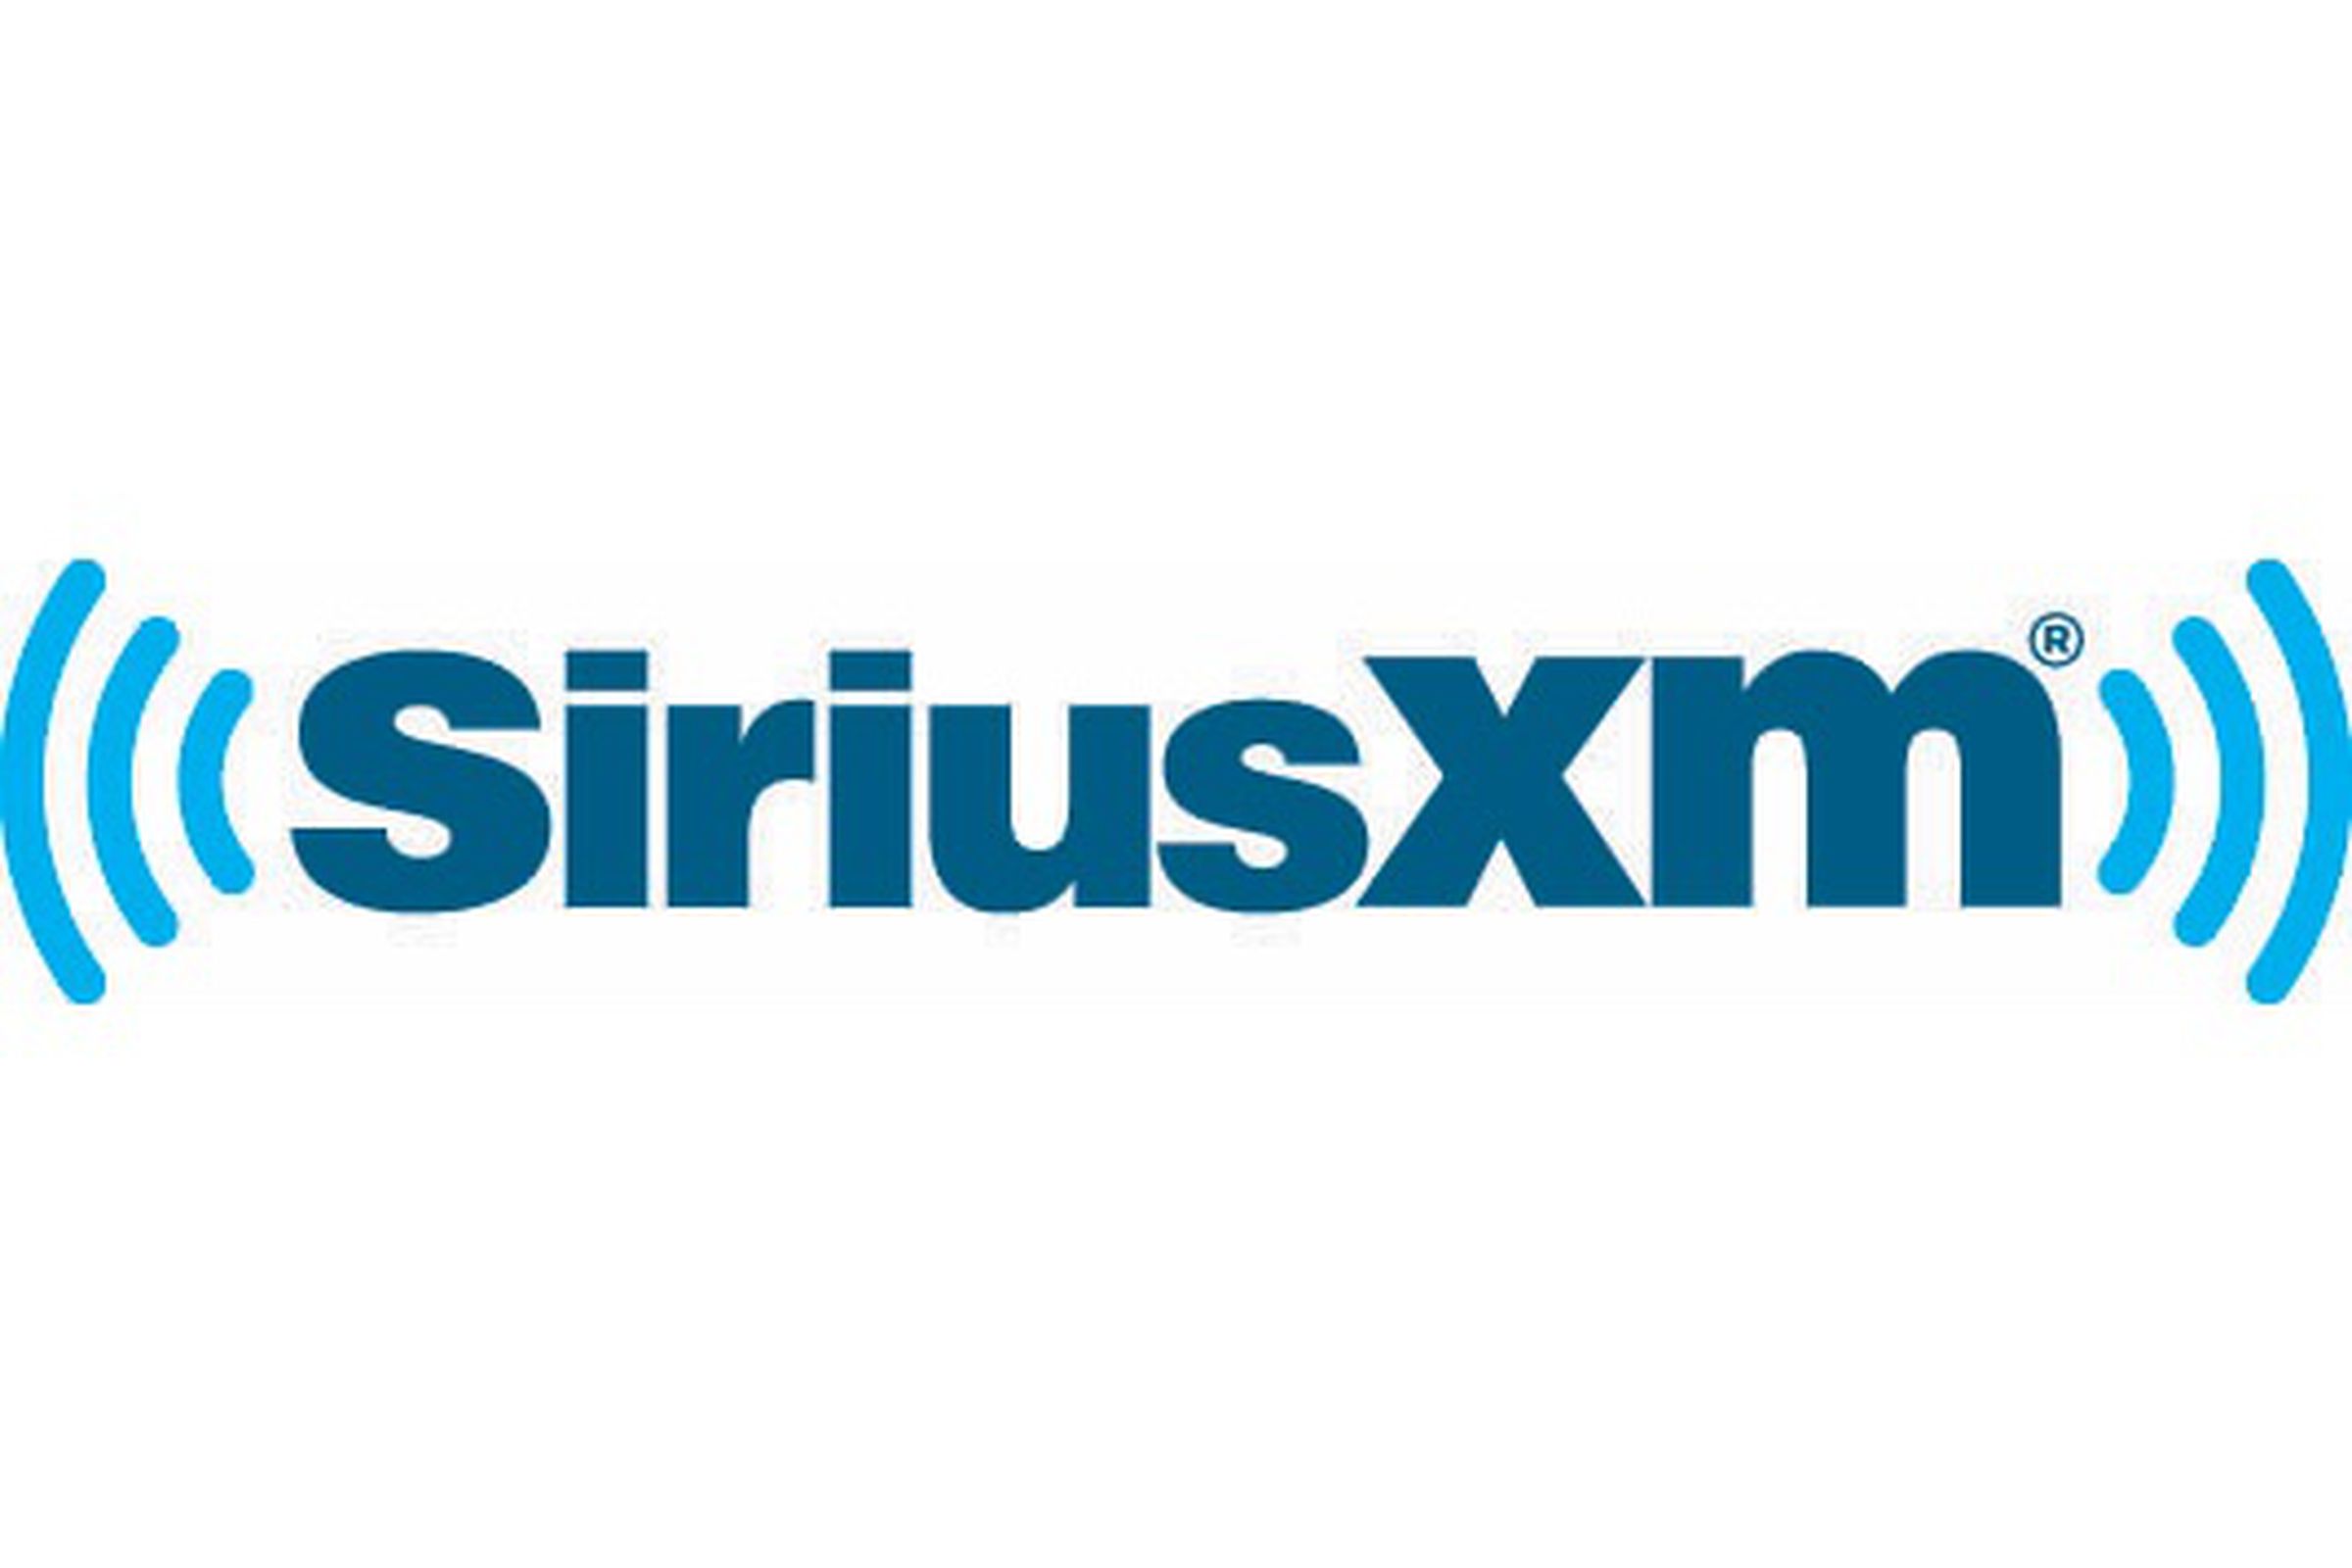 SiriusXM, along with its subsidiaries Stitcher and Pandora, are being sued by Deaf advocates